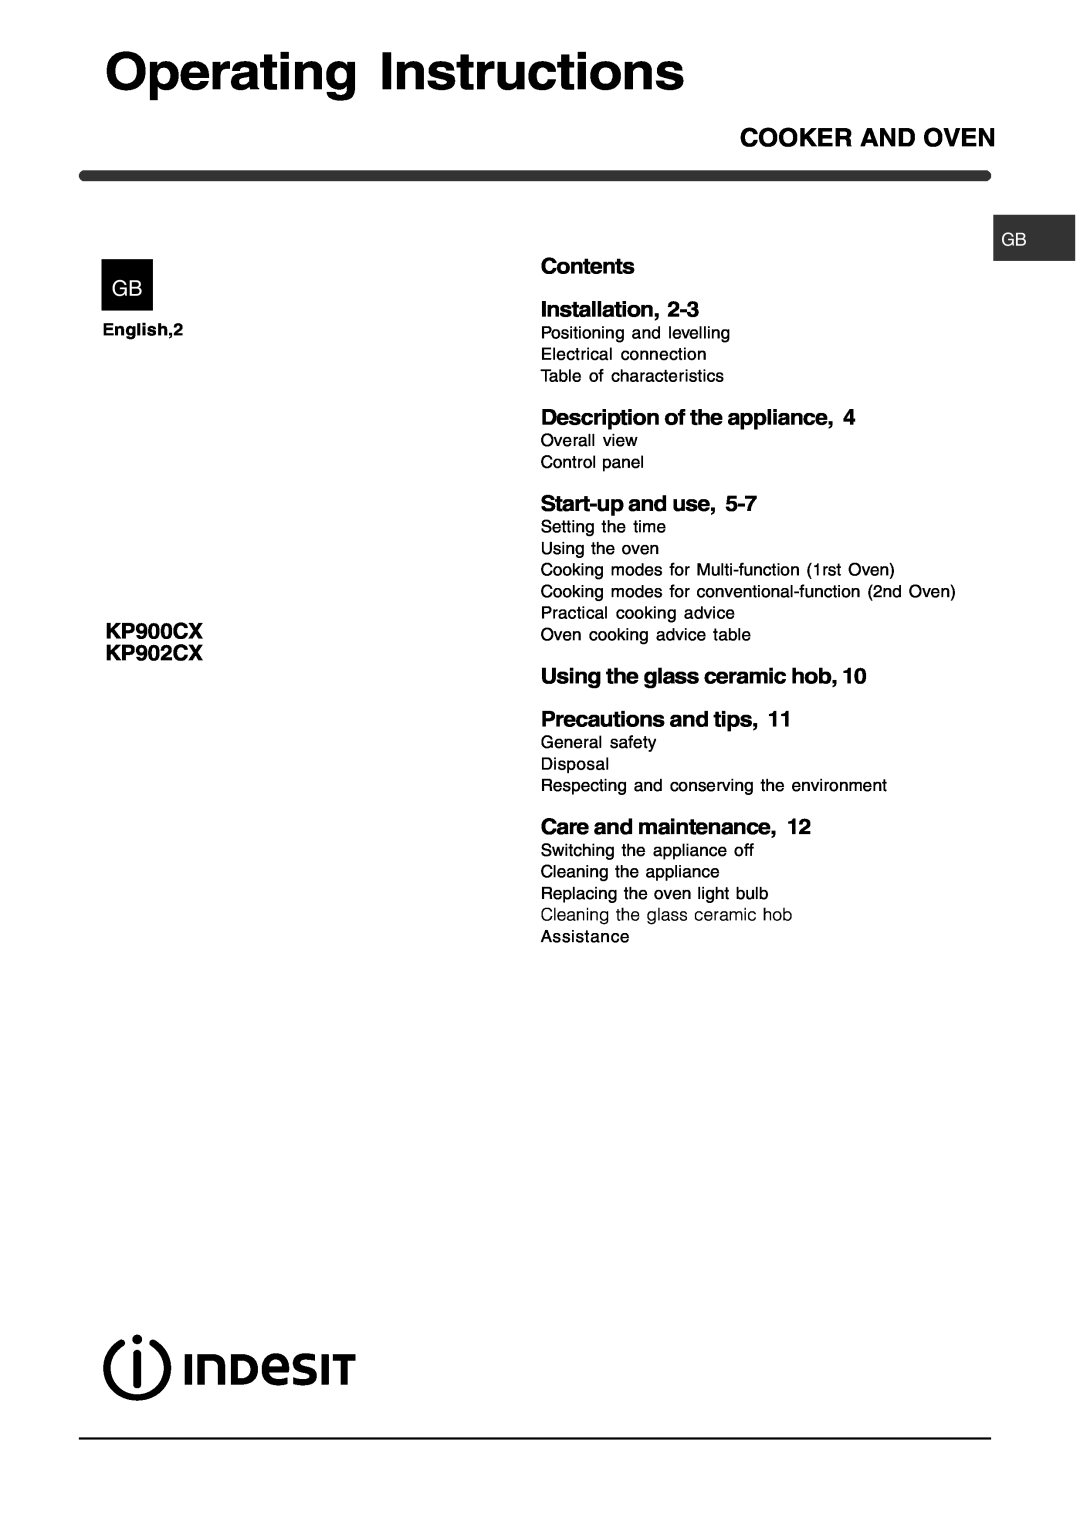 Indesit manual Operating Instructions, KP900CX KP902CX, Contents Installation, Description of the appliance 